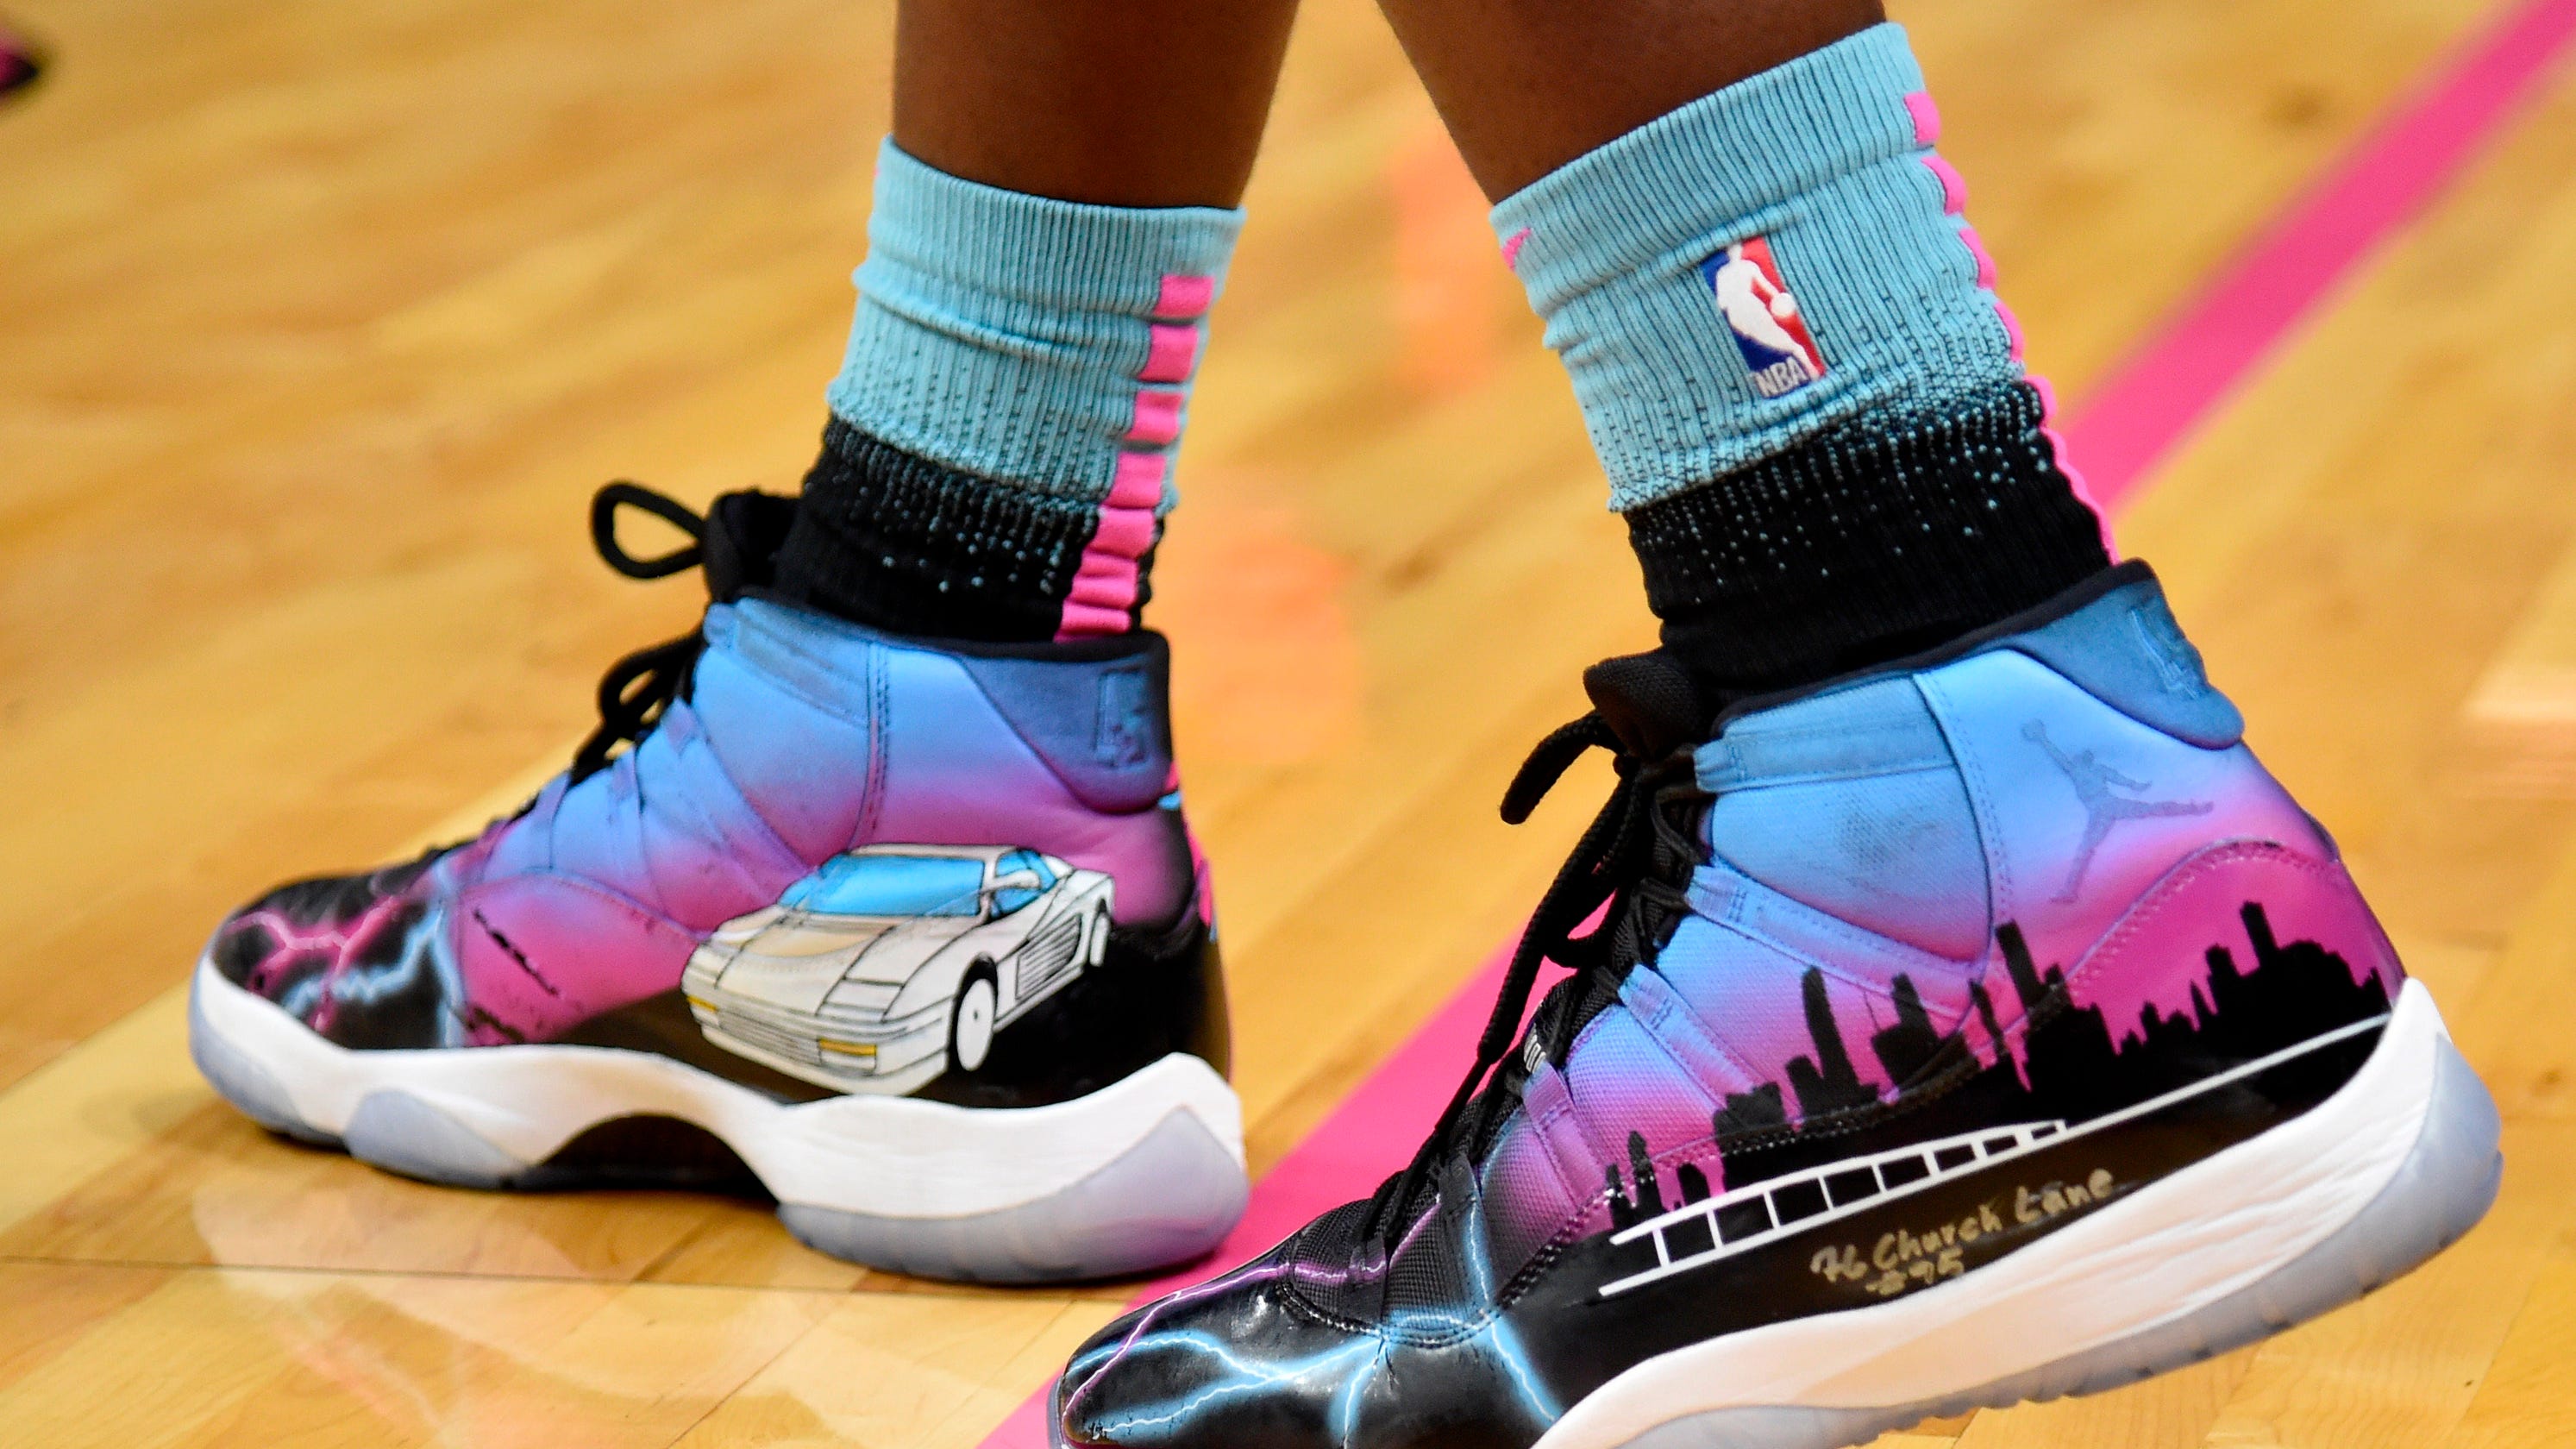 Soles by Sir custom NBA shoes: See kicks made for Dwyane Wade and more